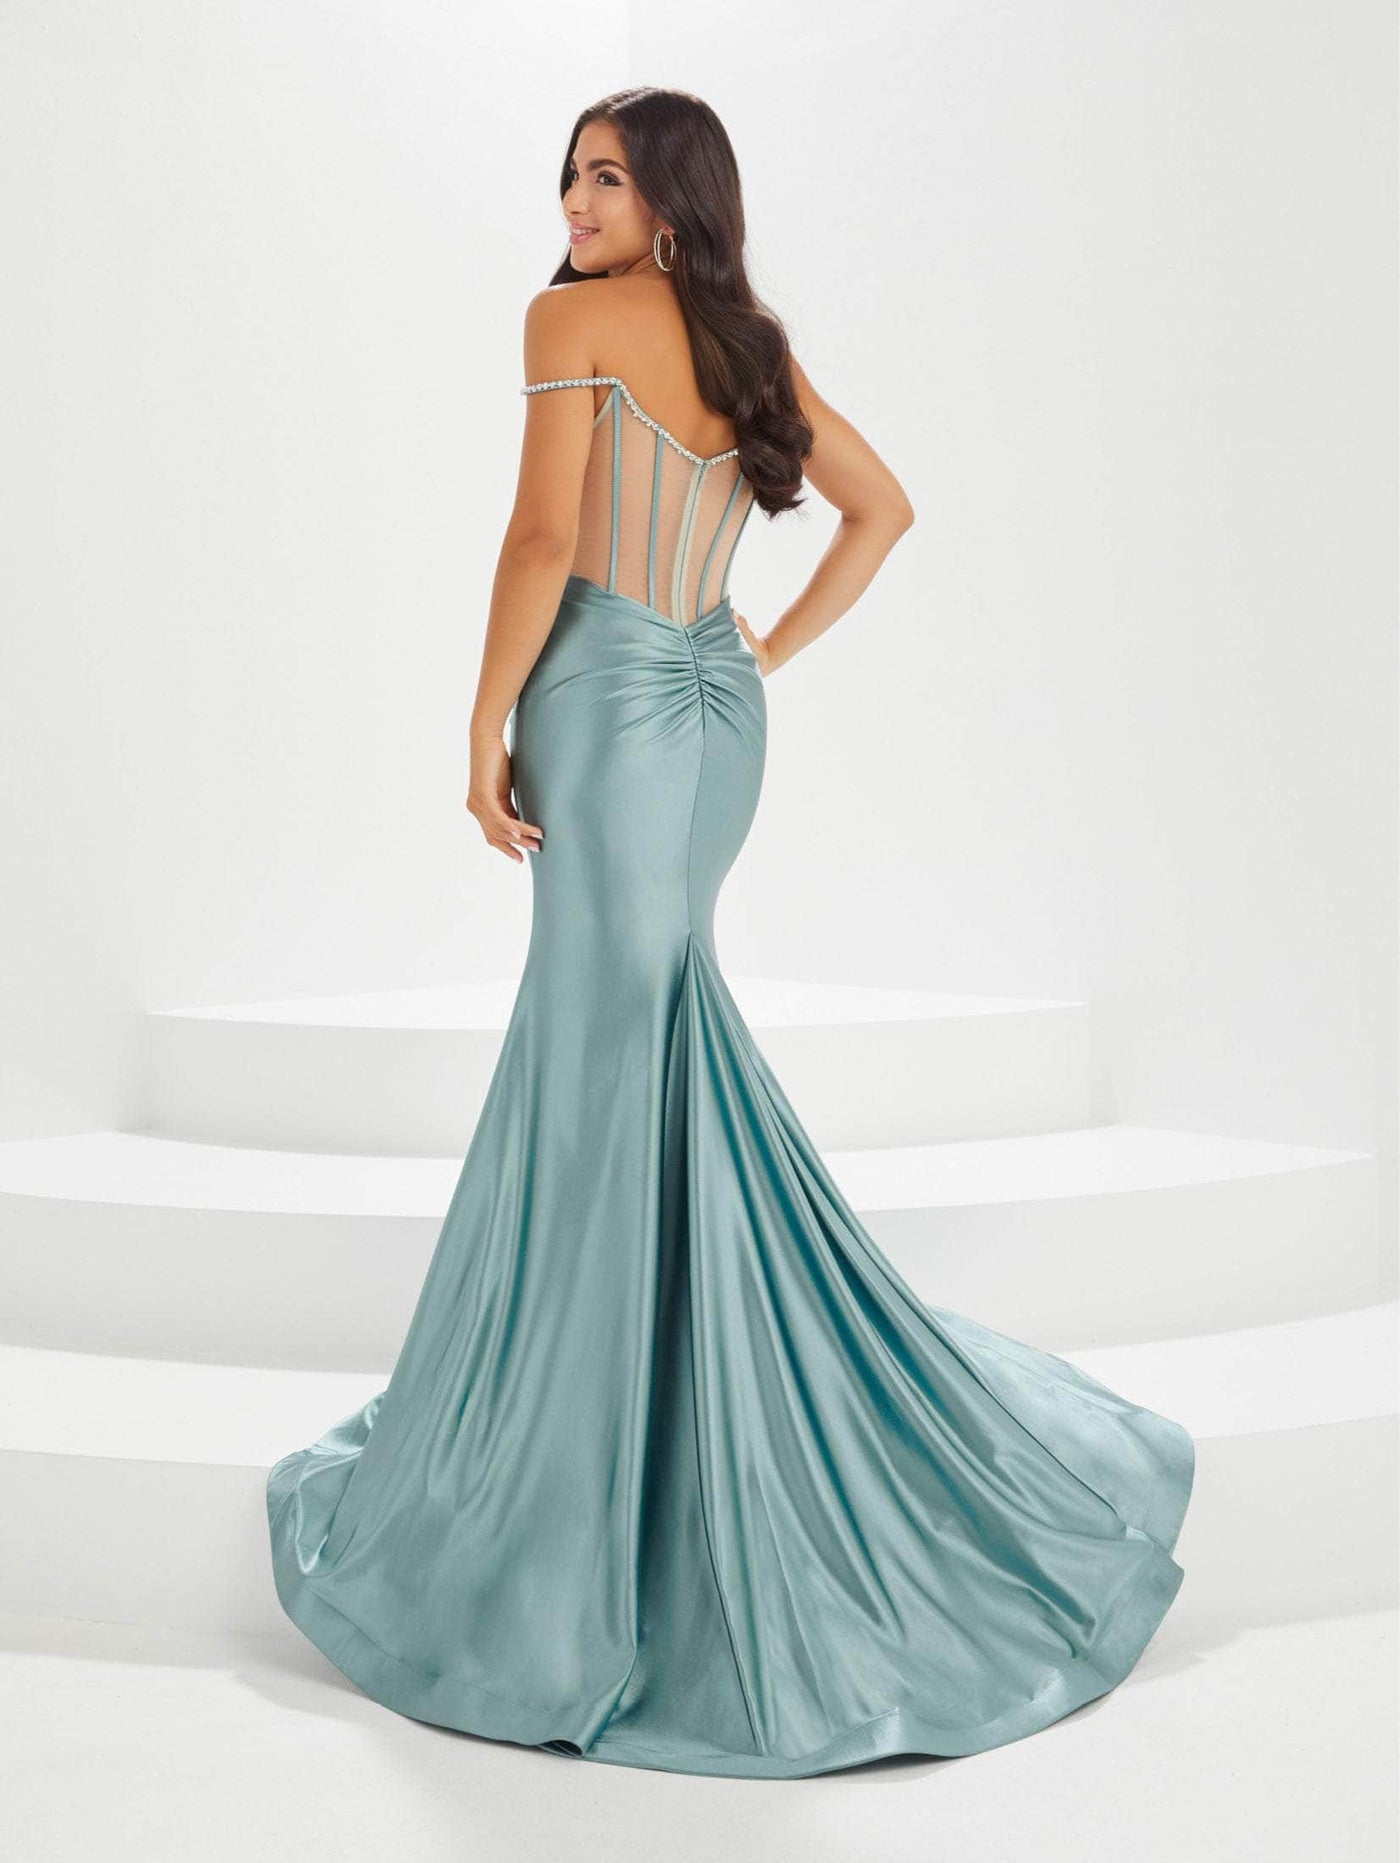 Tiffany Designs by Christina Wu 16003 - Sleeveless Prom Gown Prom Dresses